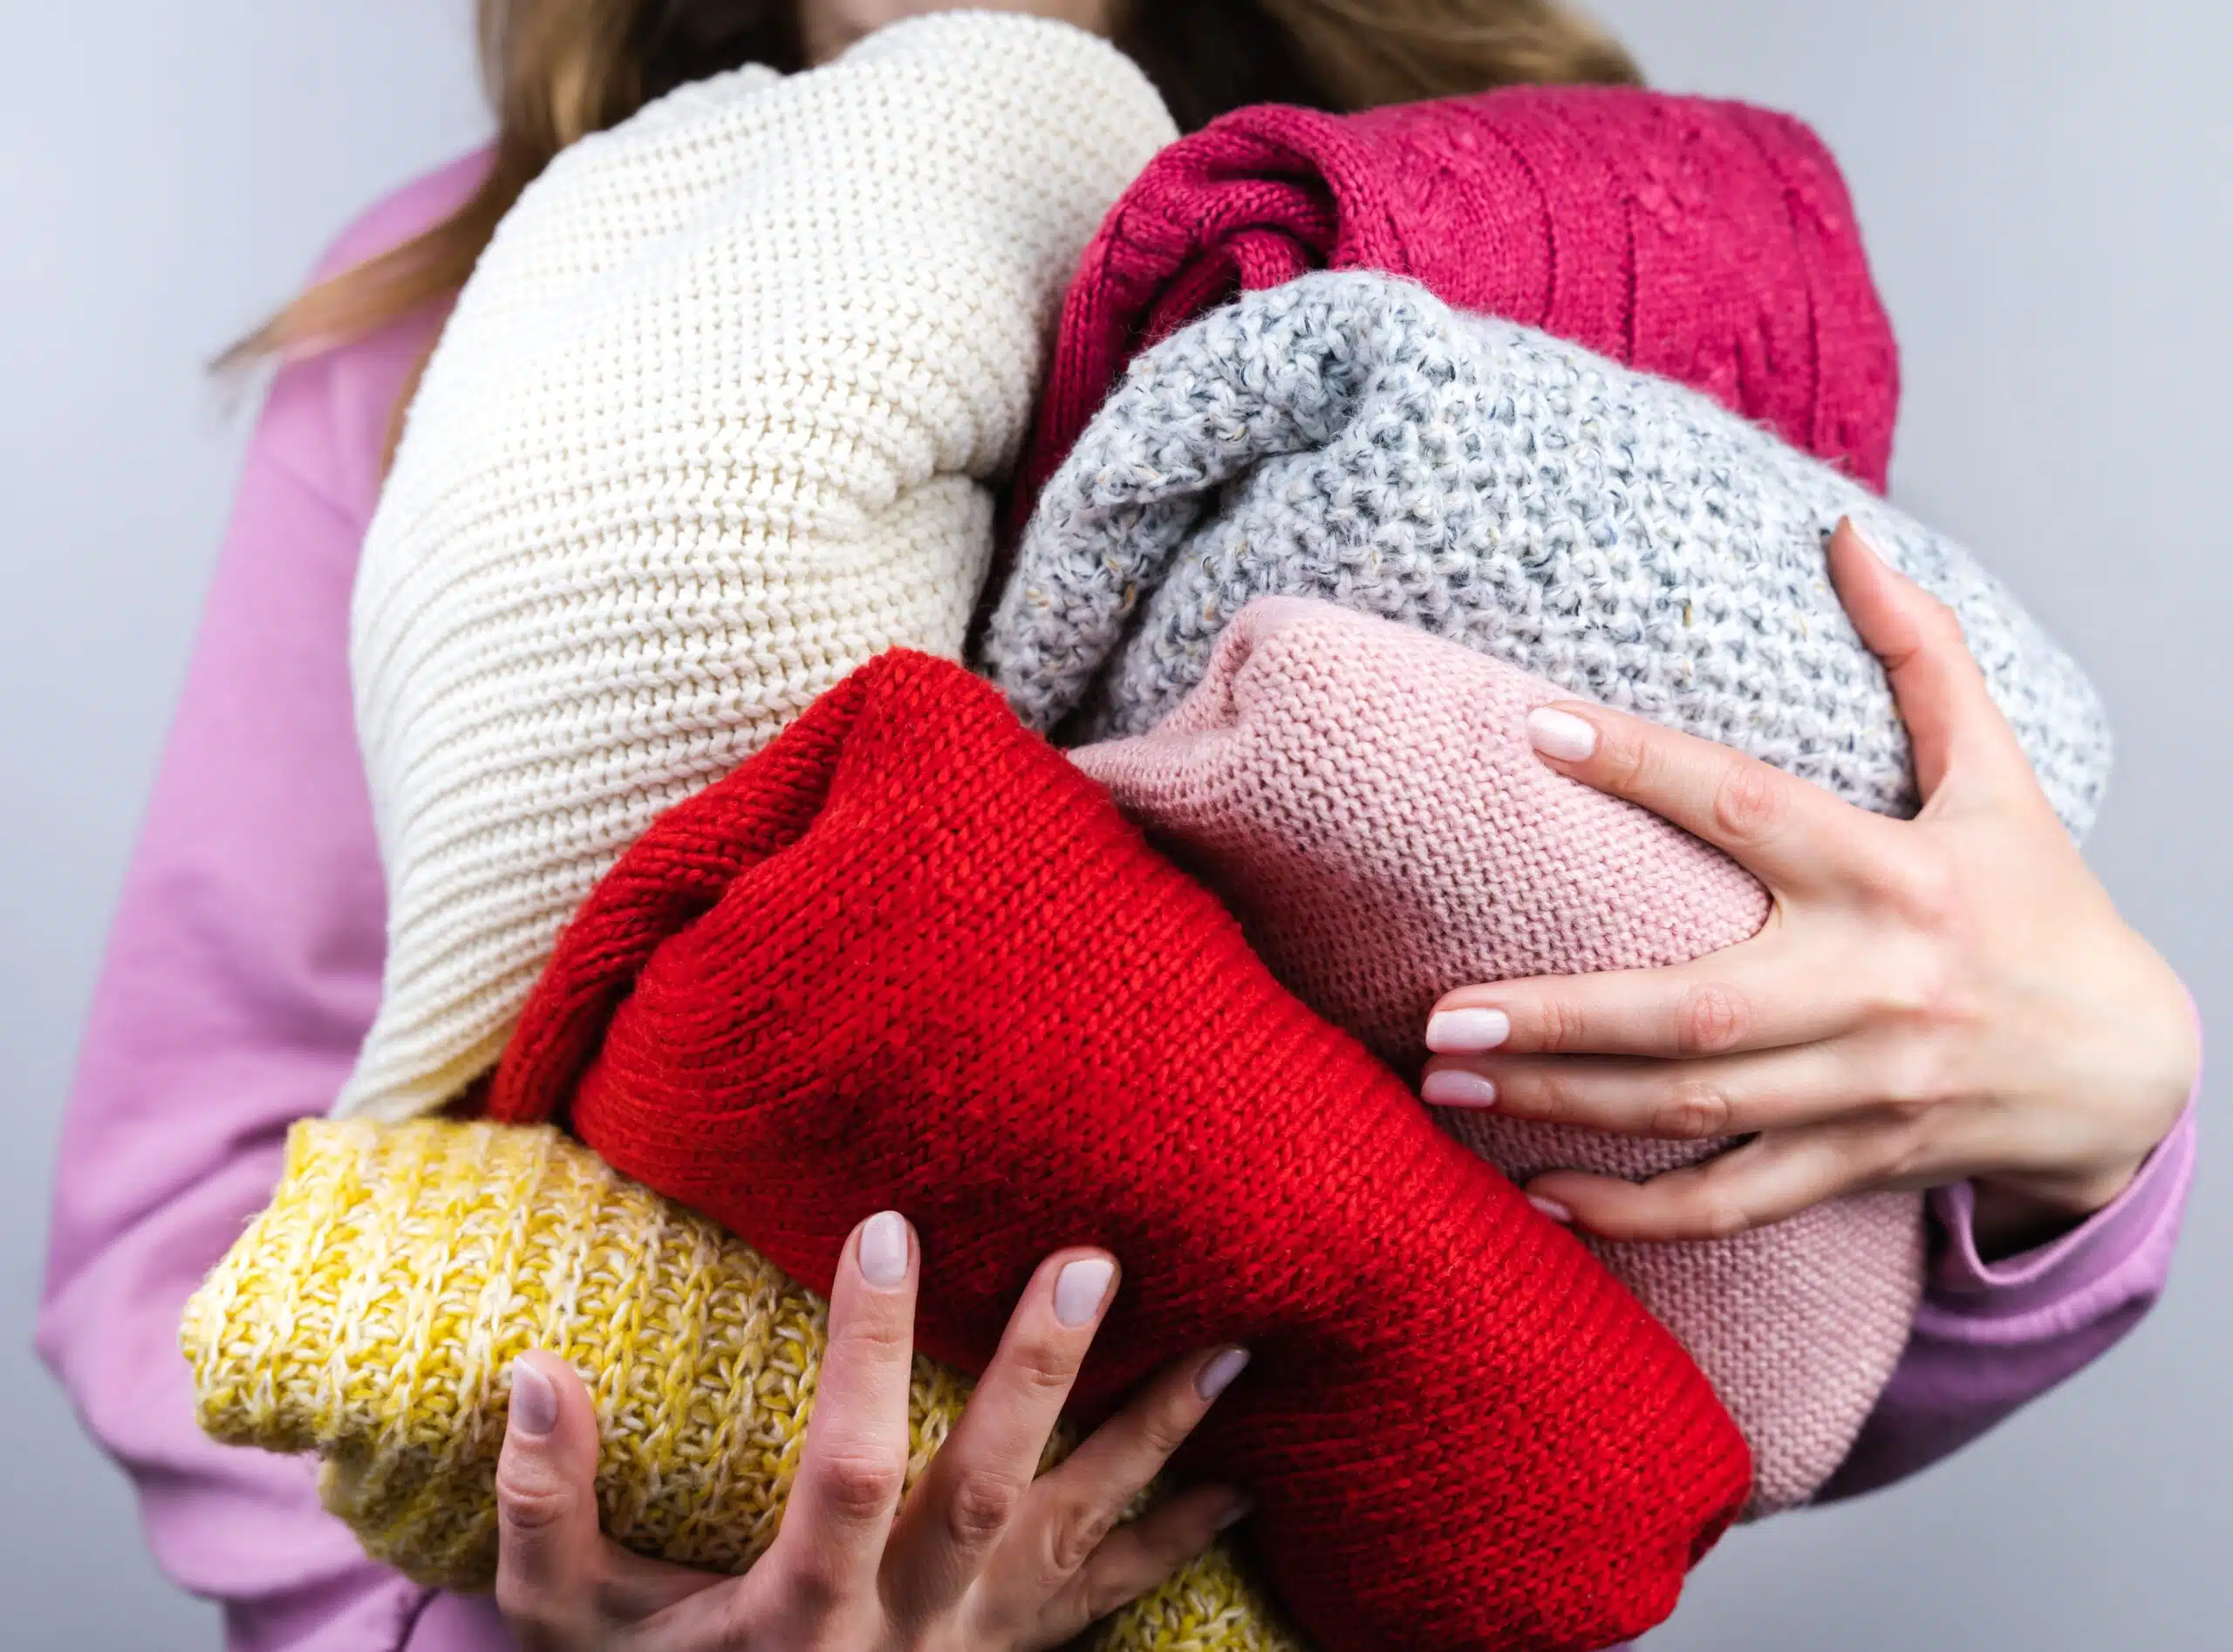 A stack of sweaters to depict proper layering in the winter for seniors